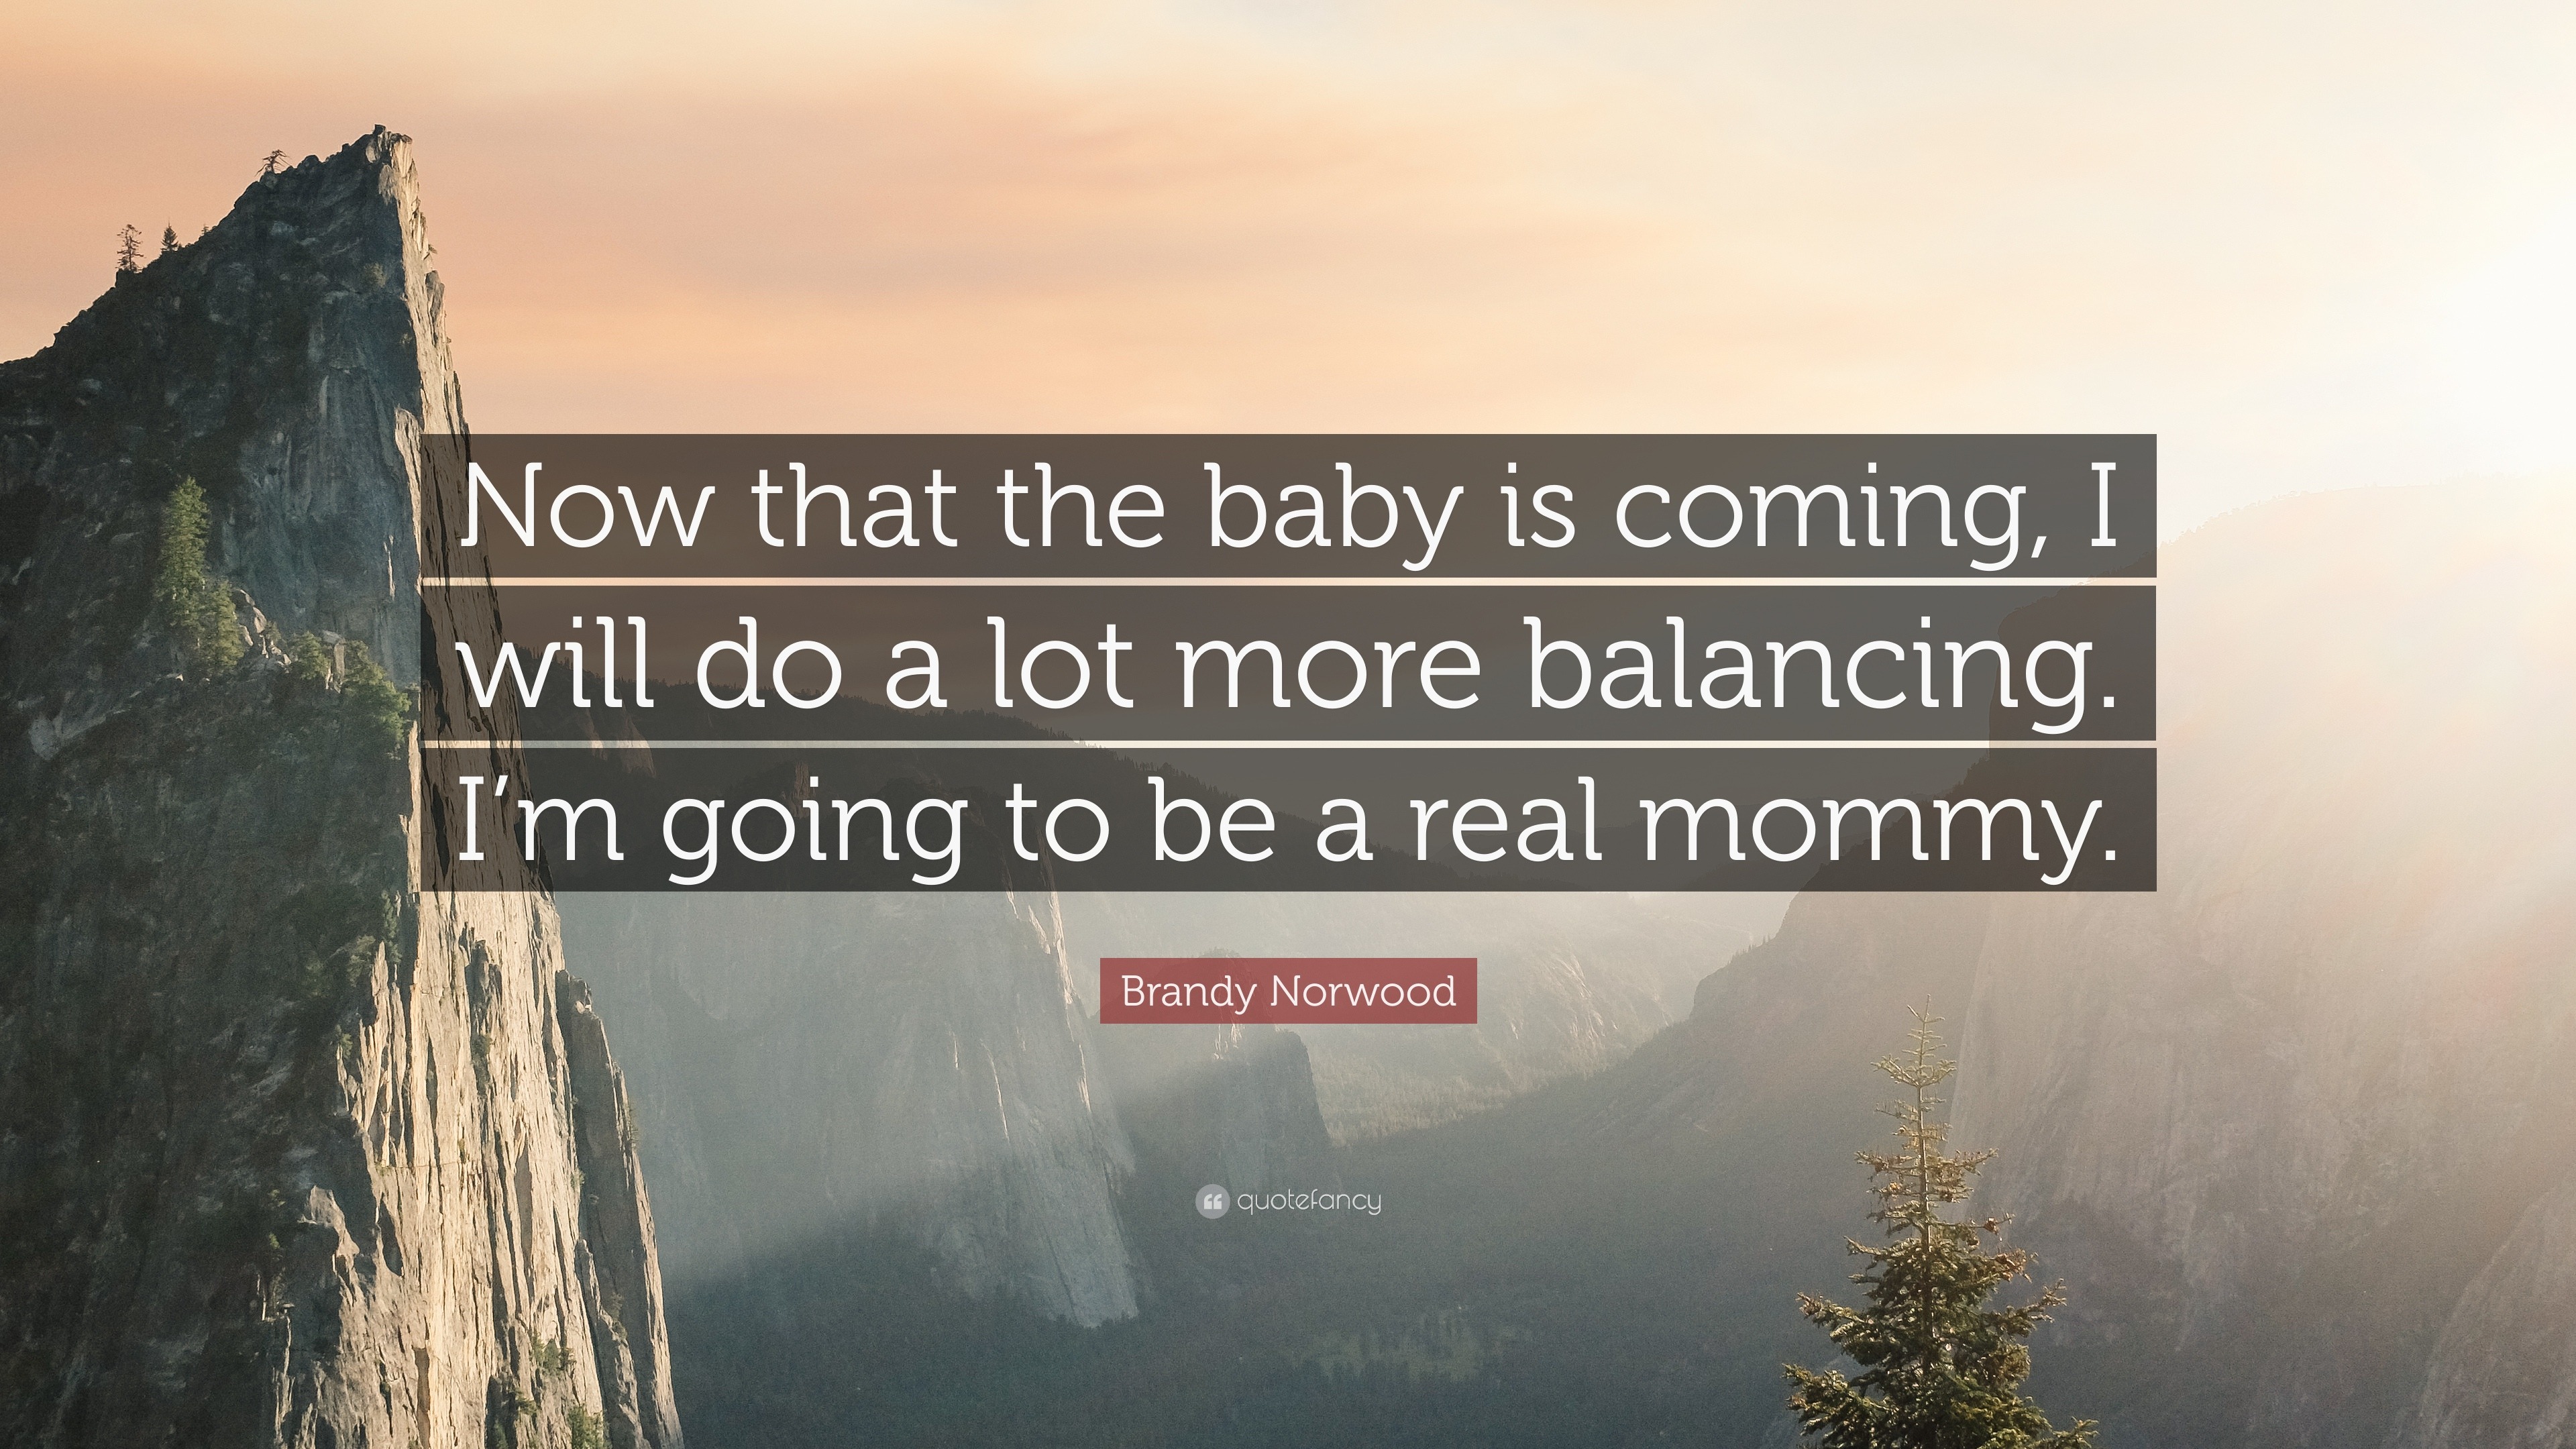 Brandy Norwood Quote: “Now that the baby is coming, I will do a lot more  balancing.